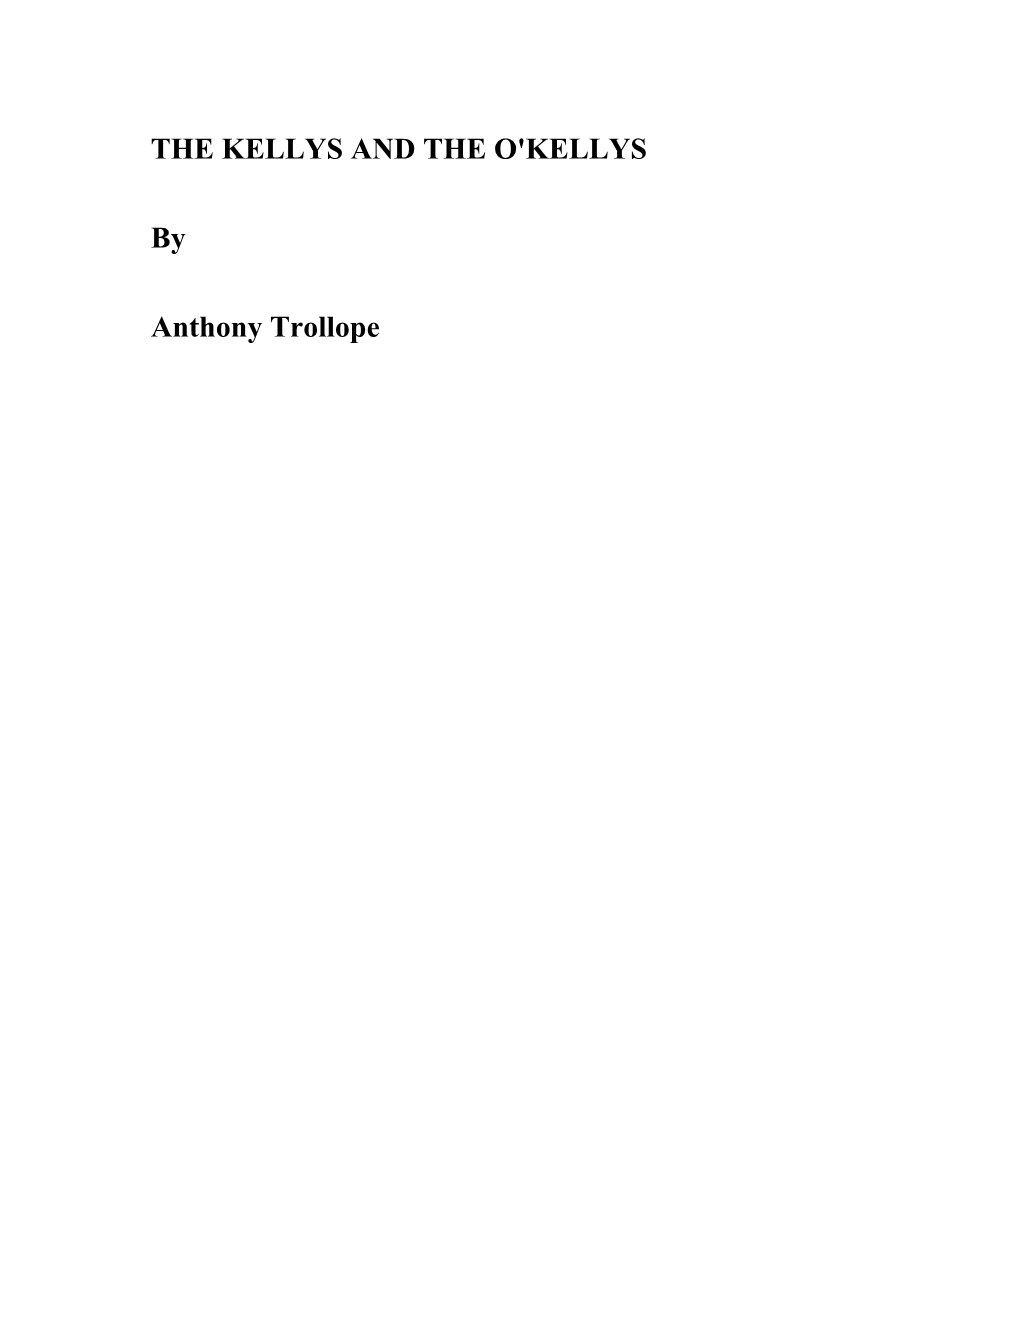 THE KELLYS and the O'kellys by Anthony Trollope